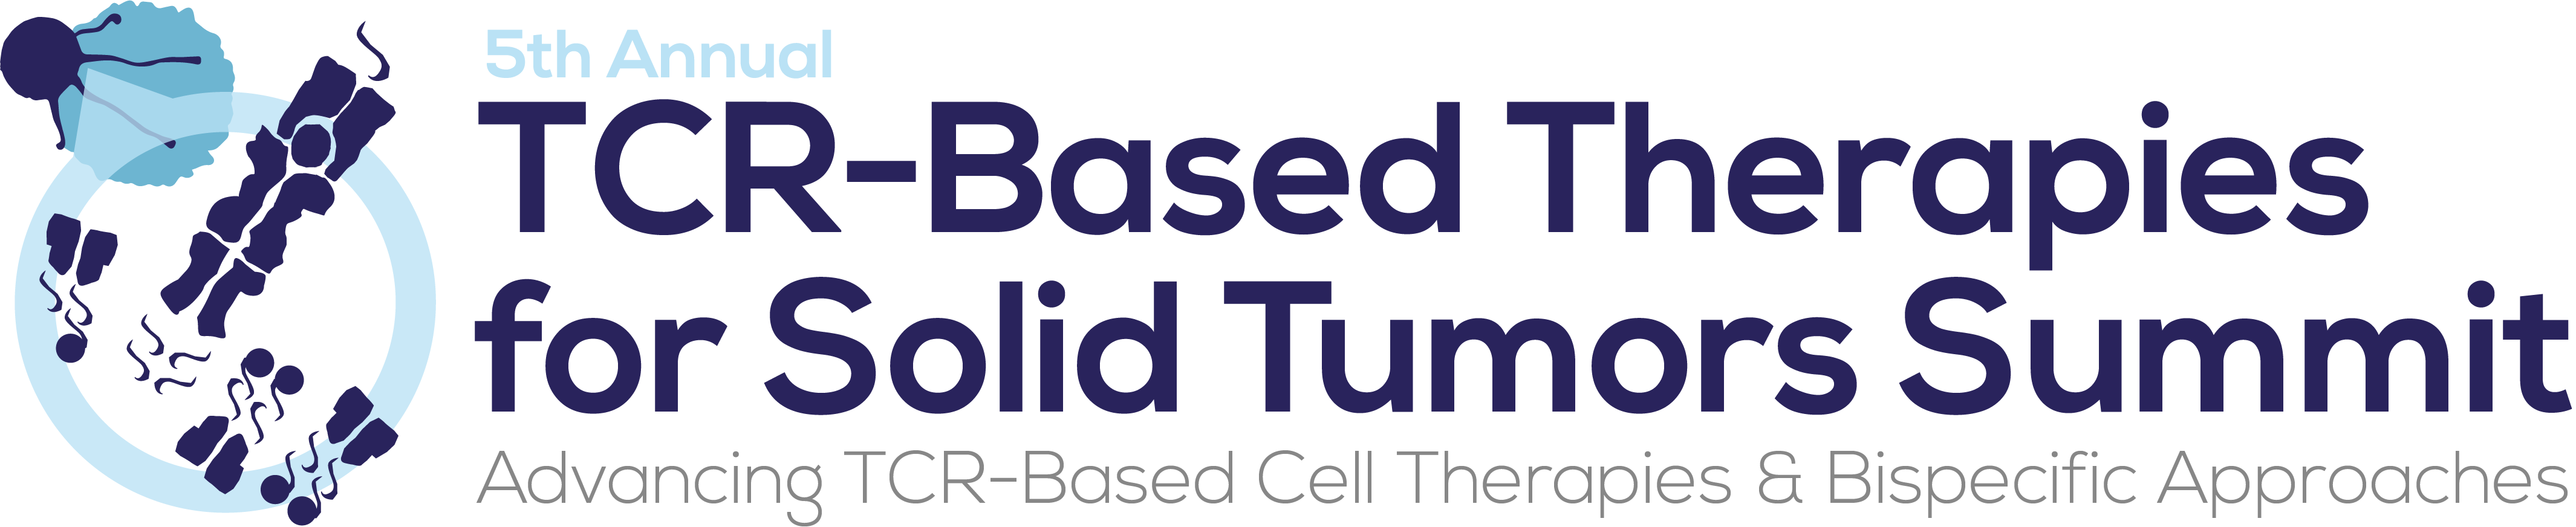 5th Annual TCR-Based Therapies for Solid Tumors Summit